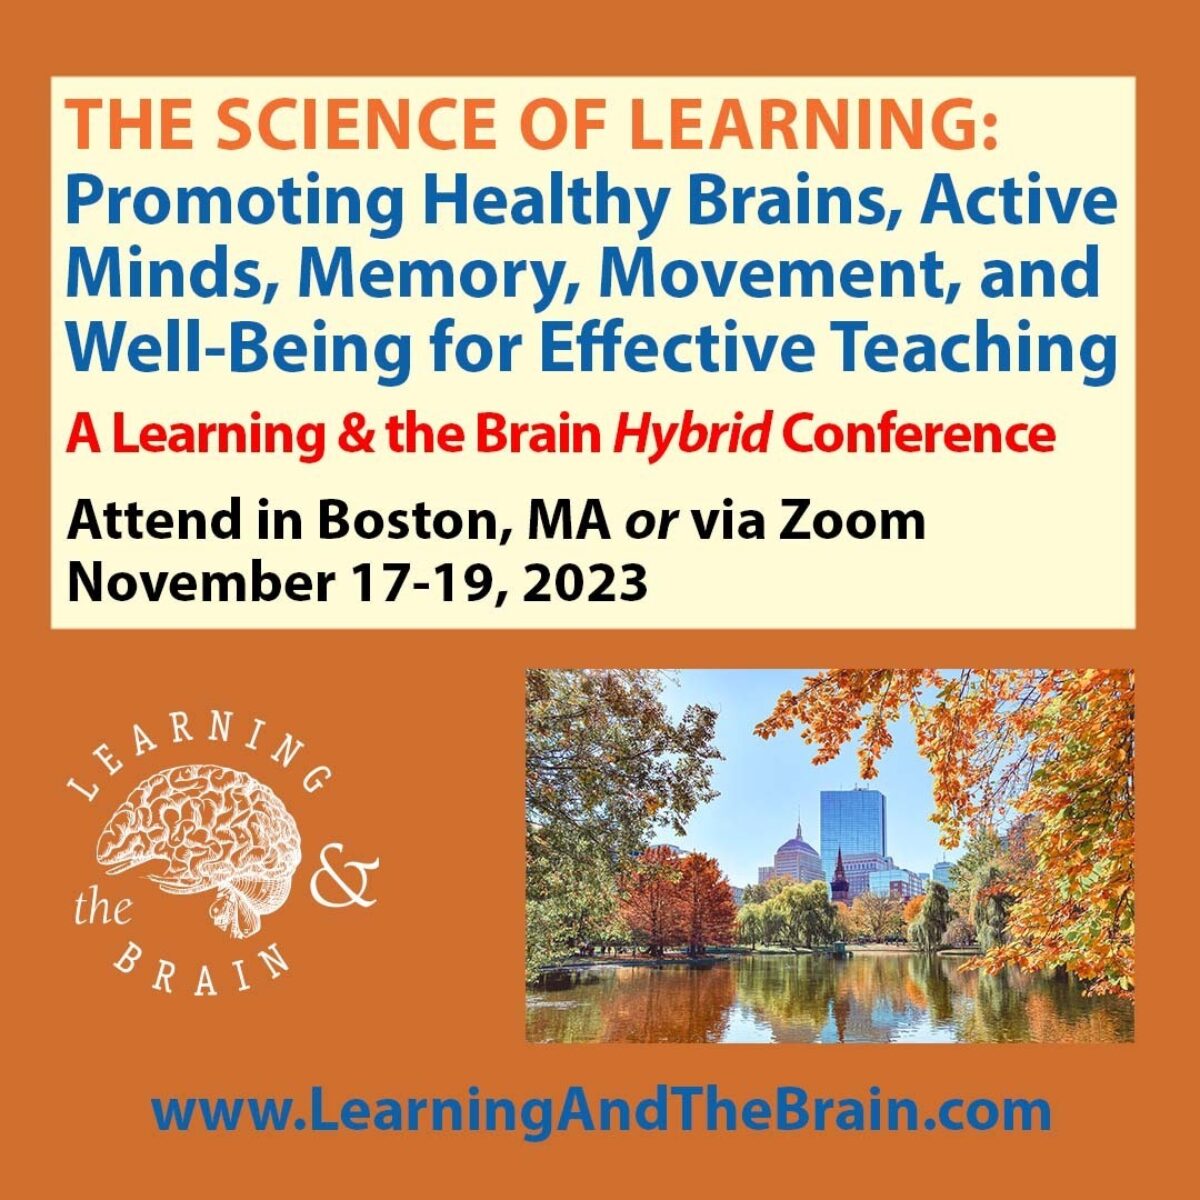 THE SCIENCE OF LEARNING in Boston